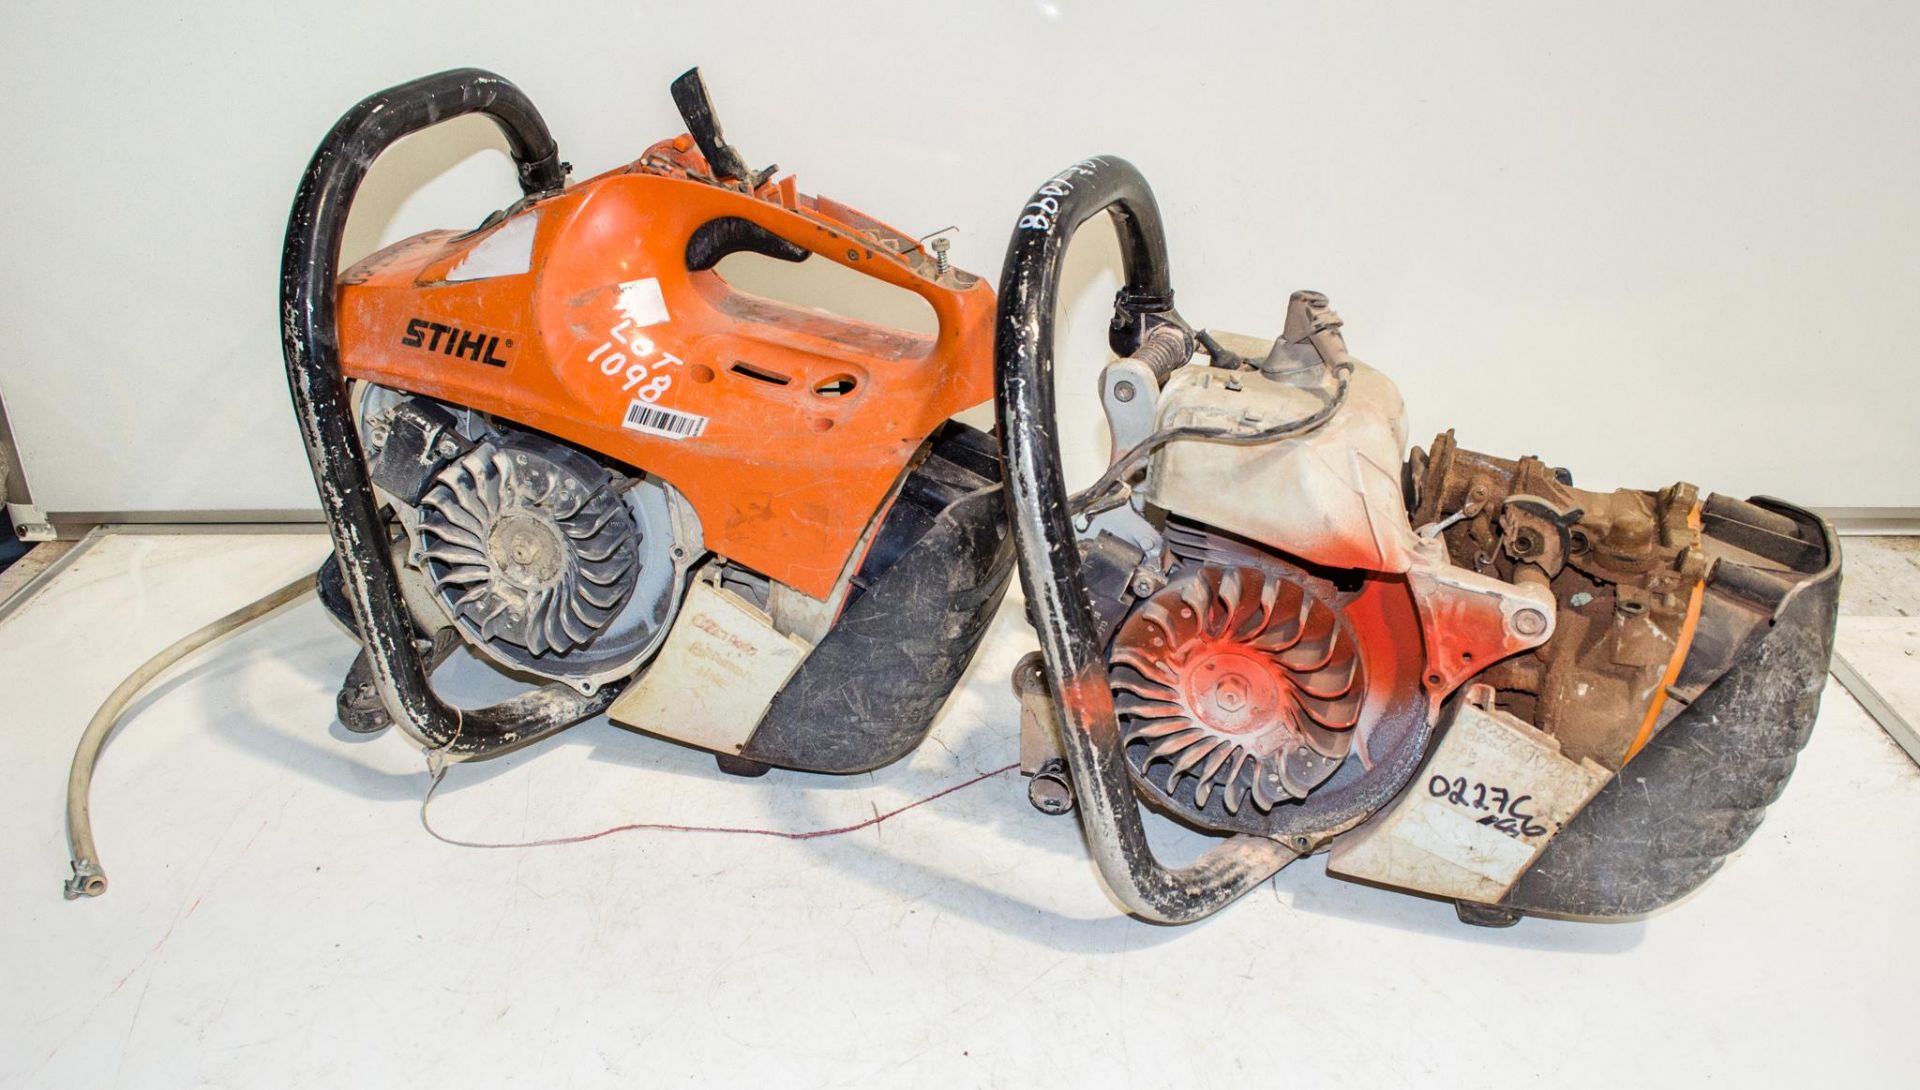 2 - Stihl TS410 petrol driven cut off saw ** Both with parts missing **